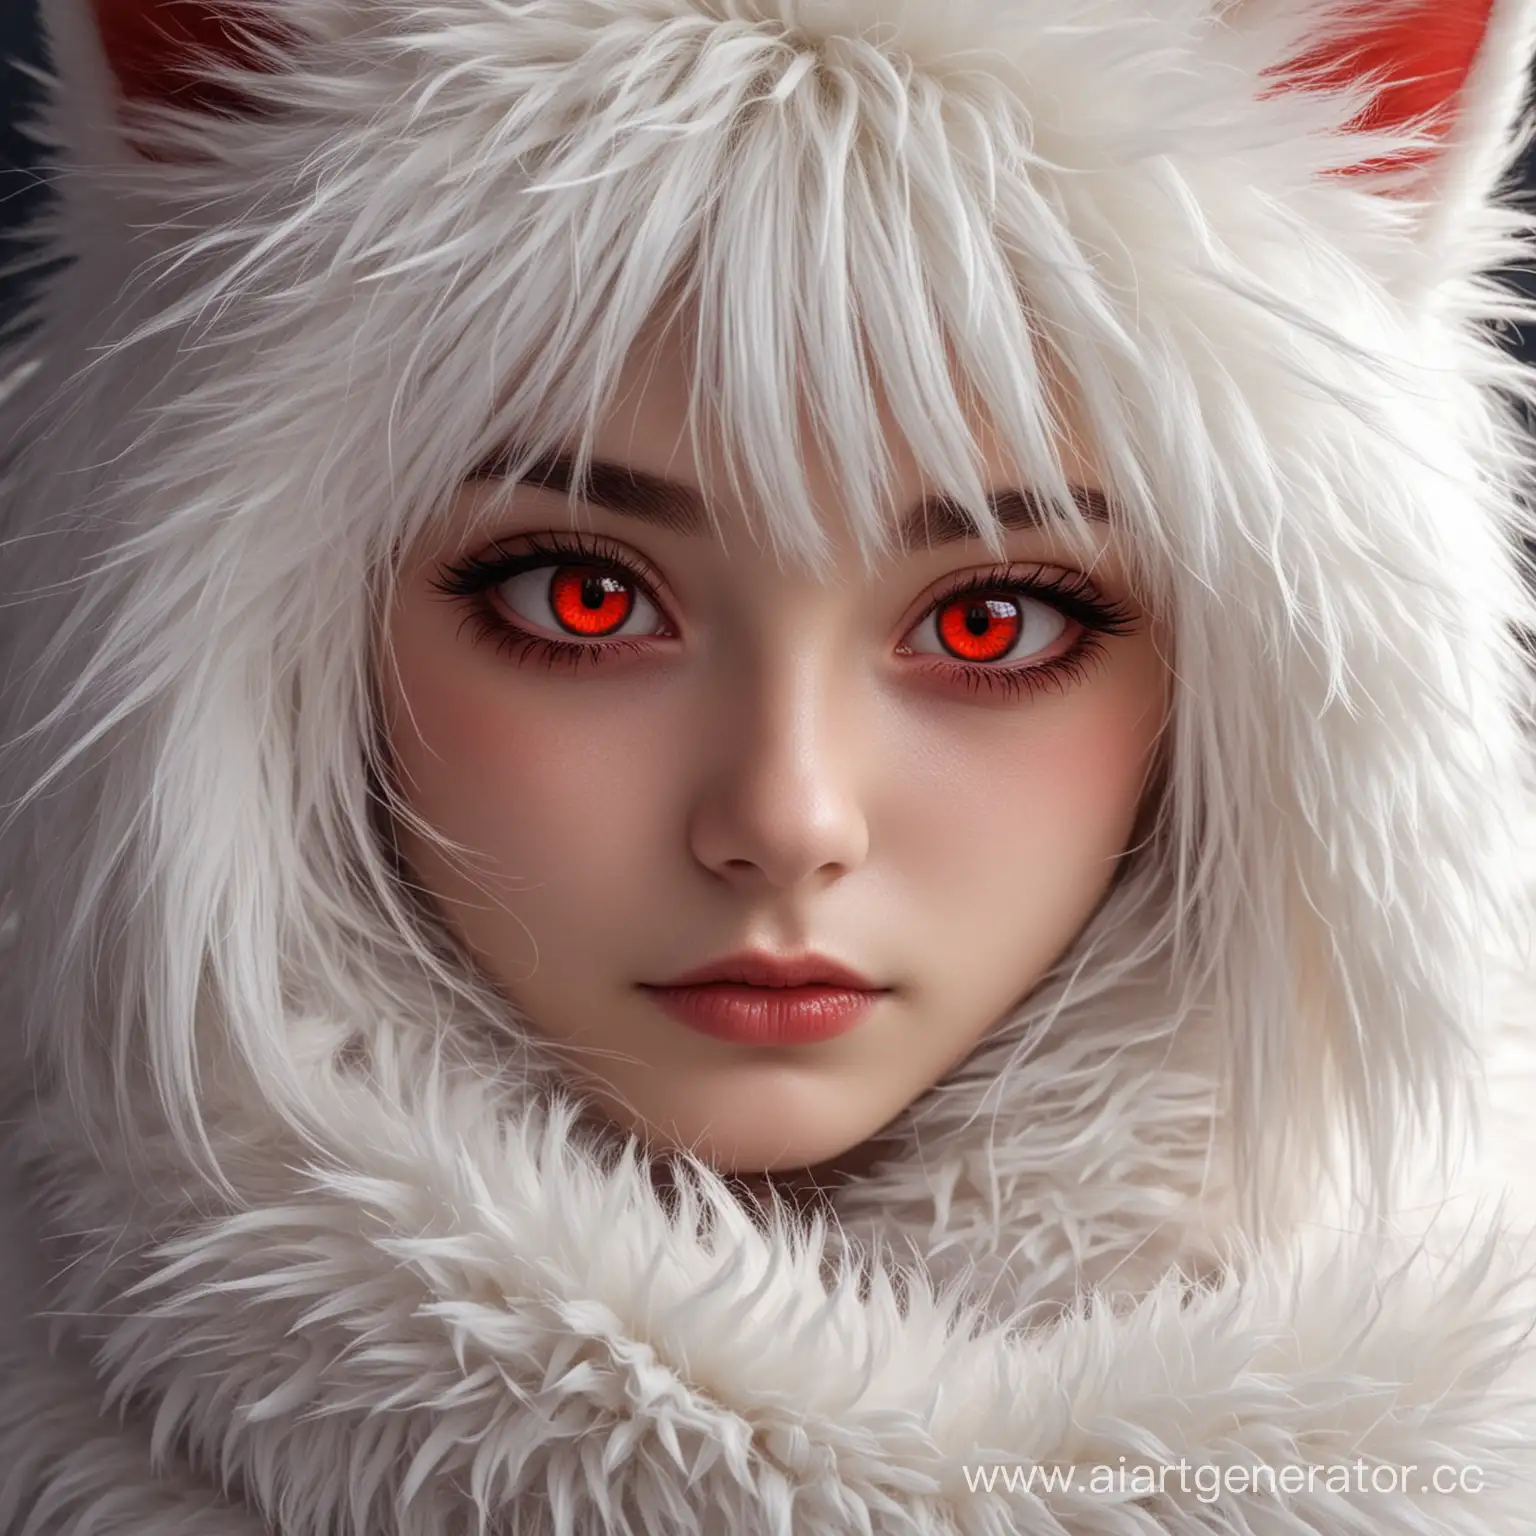 Mystical-Girl-with-Red-Eyes-and-Furry-Features